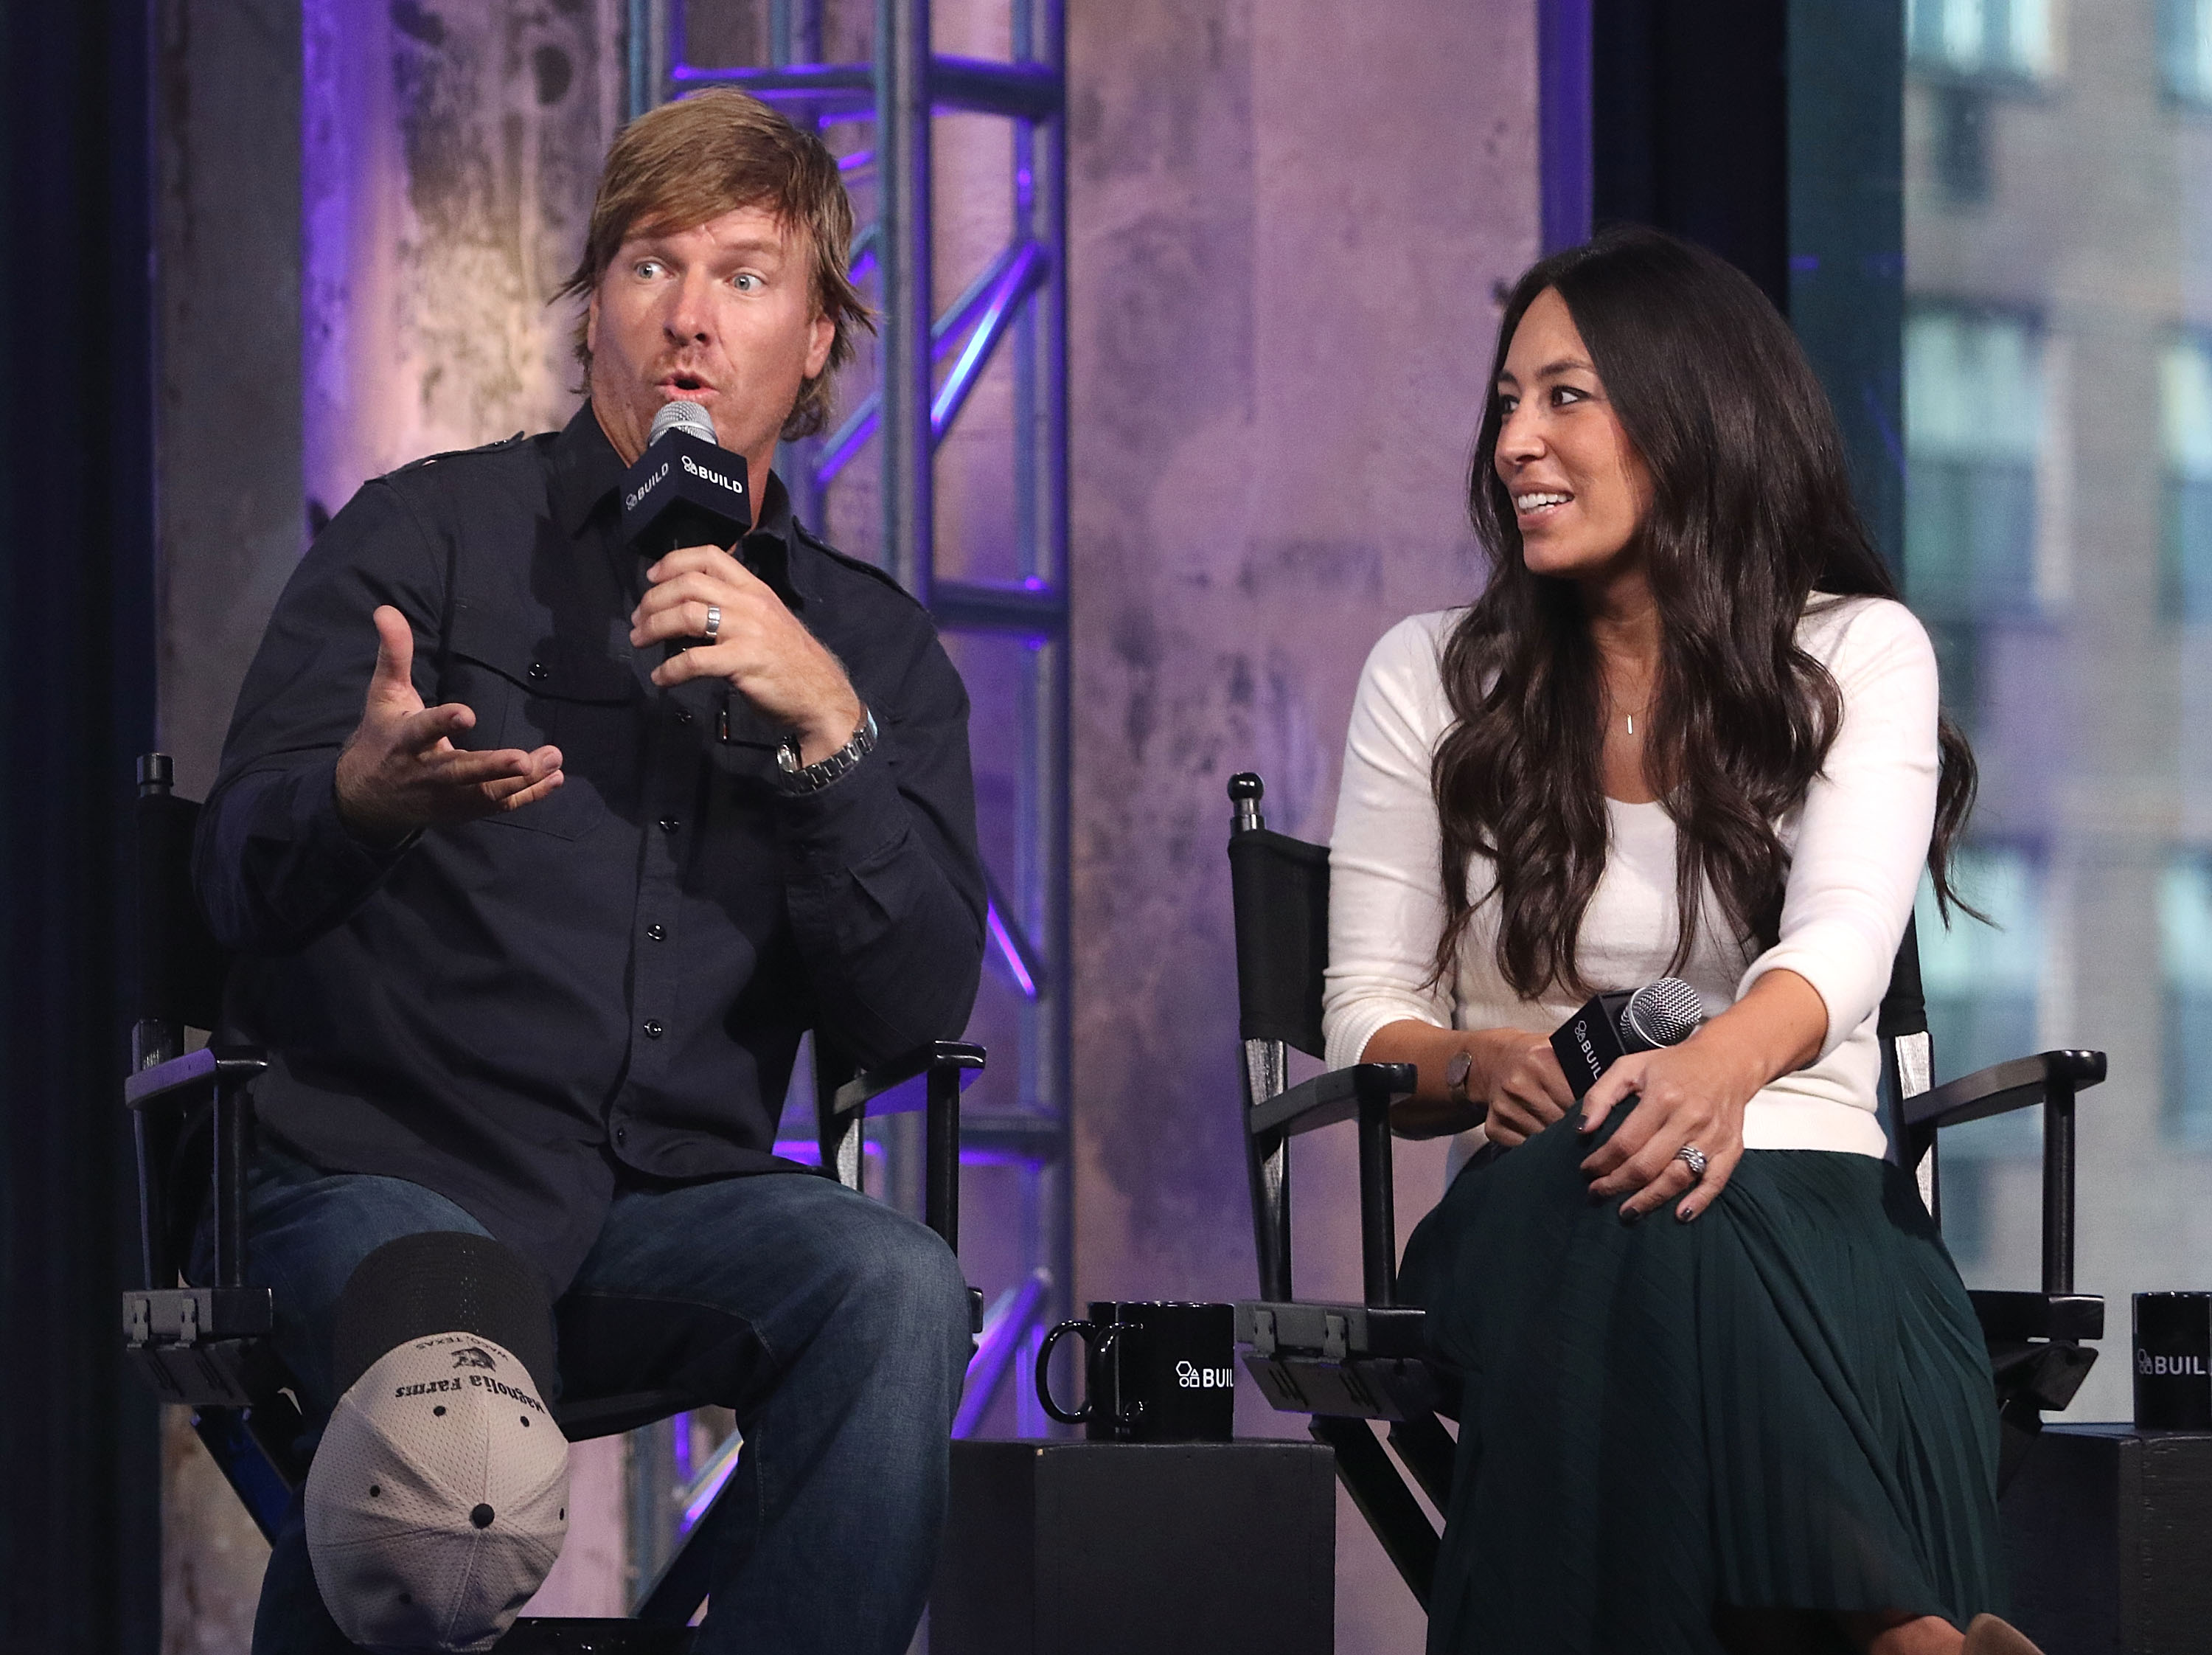 Chip and Joanna Gaines during the launch of their book 'The Magnolia Story' in 2016